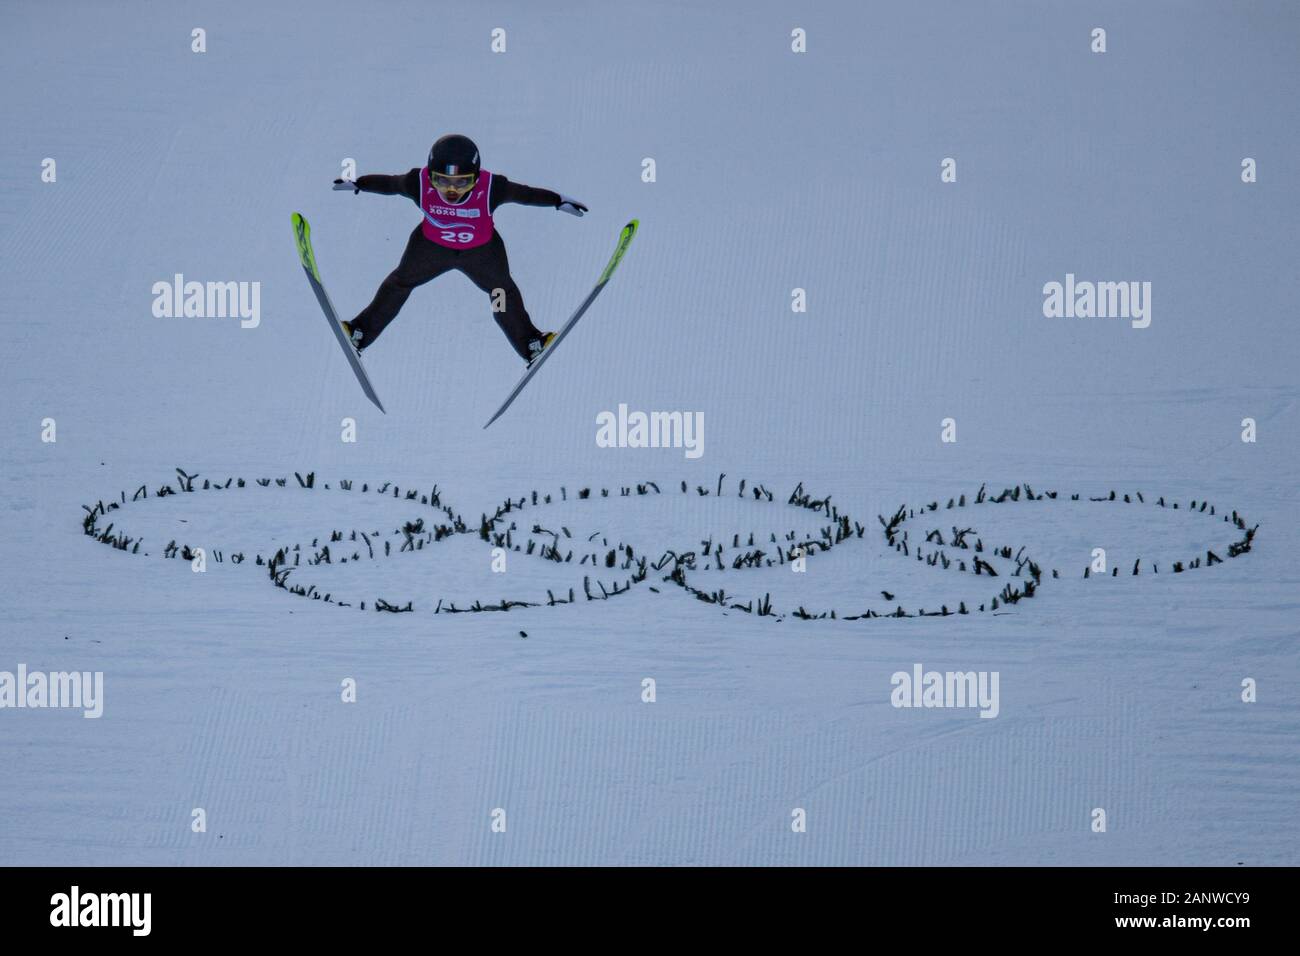 LAUSANNE, SWITZERLAND. 19th, Jan 2020. FOUBERT Valentin (FRA) competes in the Ski Jumping: Men's Individual Competition First Round during the Lausanne 2020 Youth Olympic Games at Les Tuffes Nordic Centre on Sunday, 19 January 2020. LAUSANNE, SWITZERLAND. Credit: Taka G Wu/Alamy Live News Stock Photo